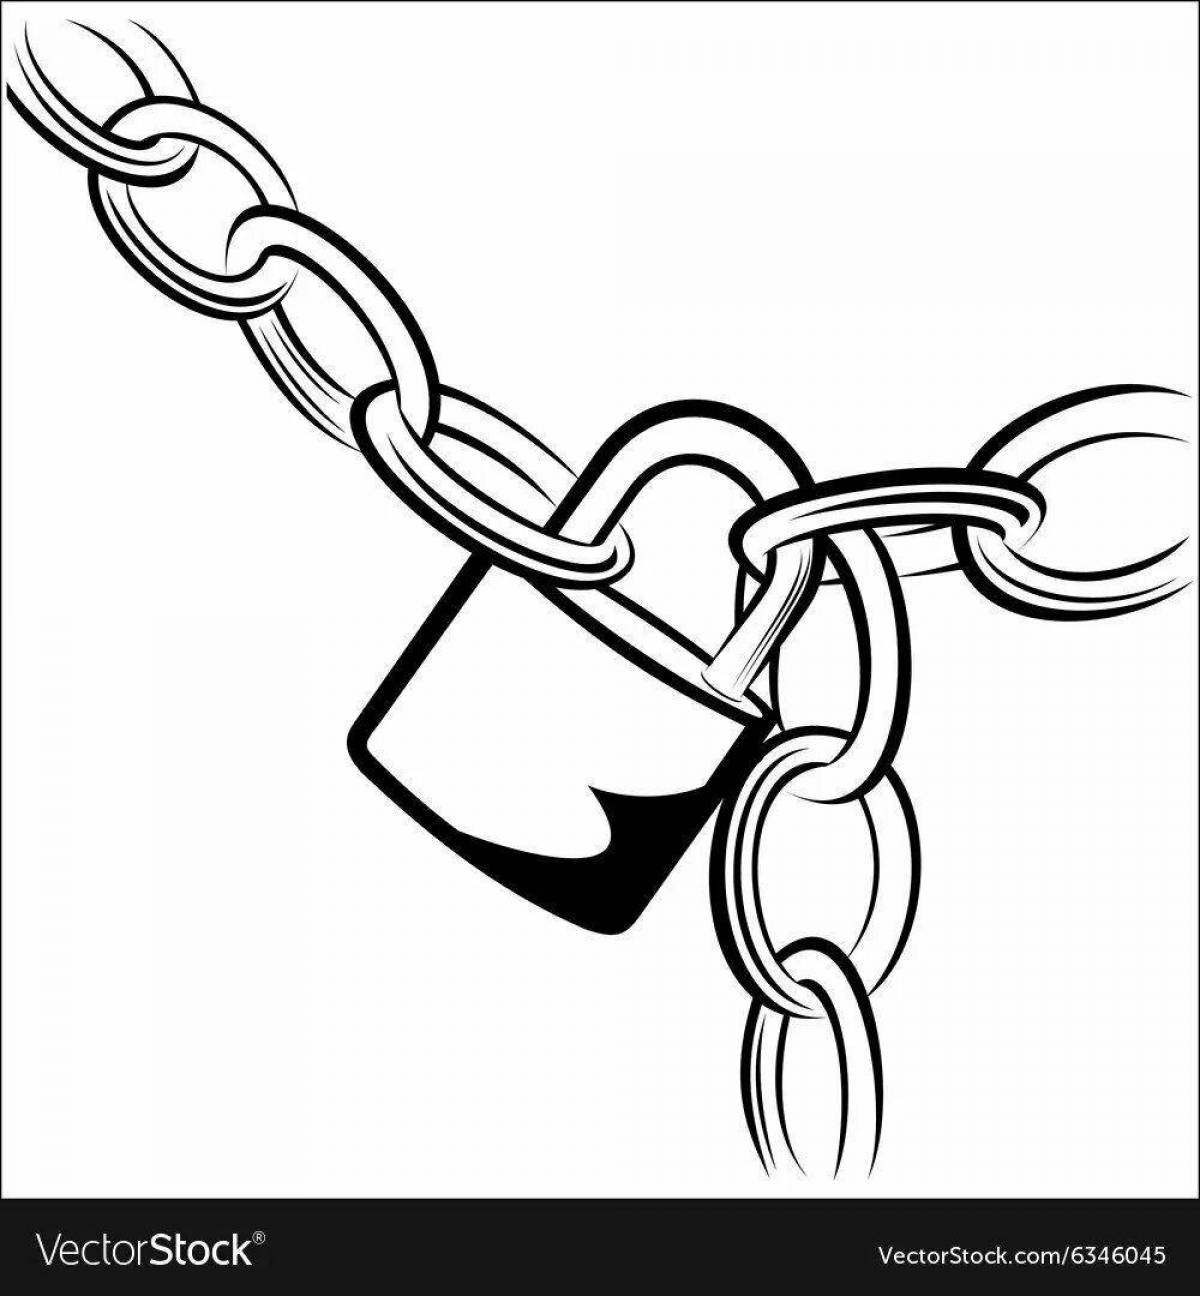 Coloring page bright chain